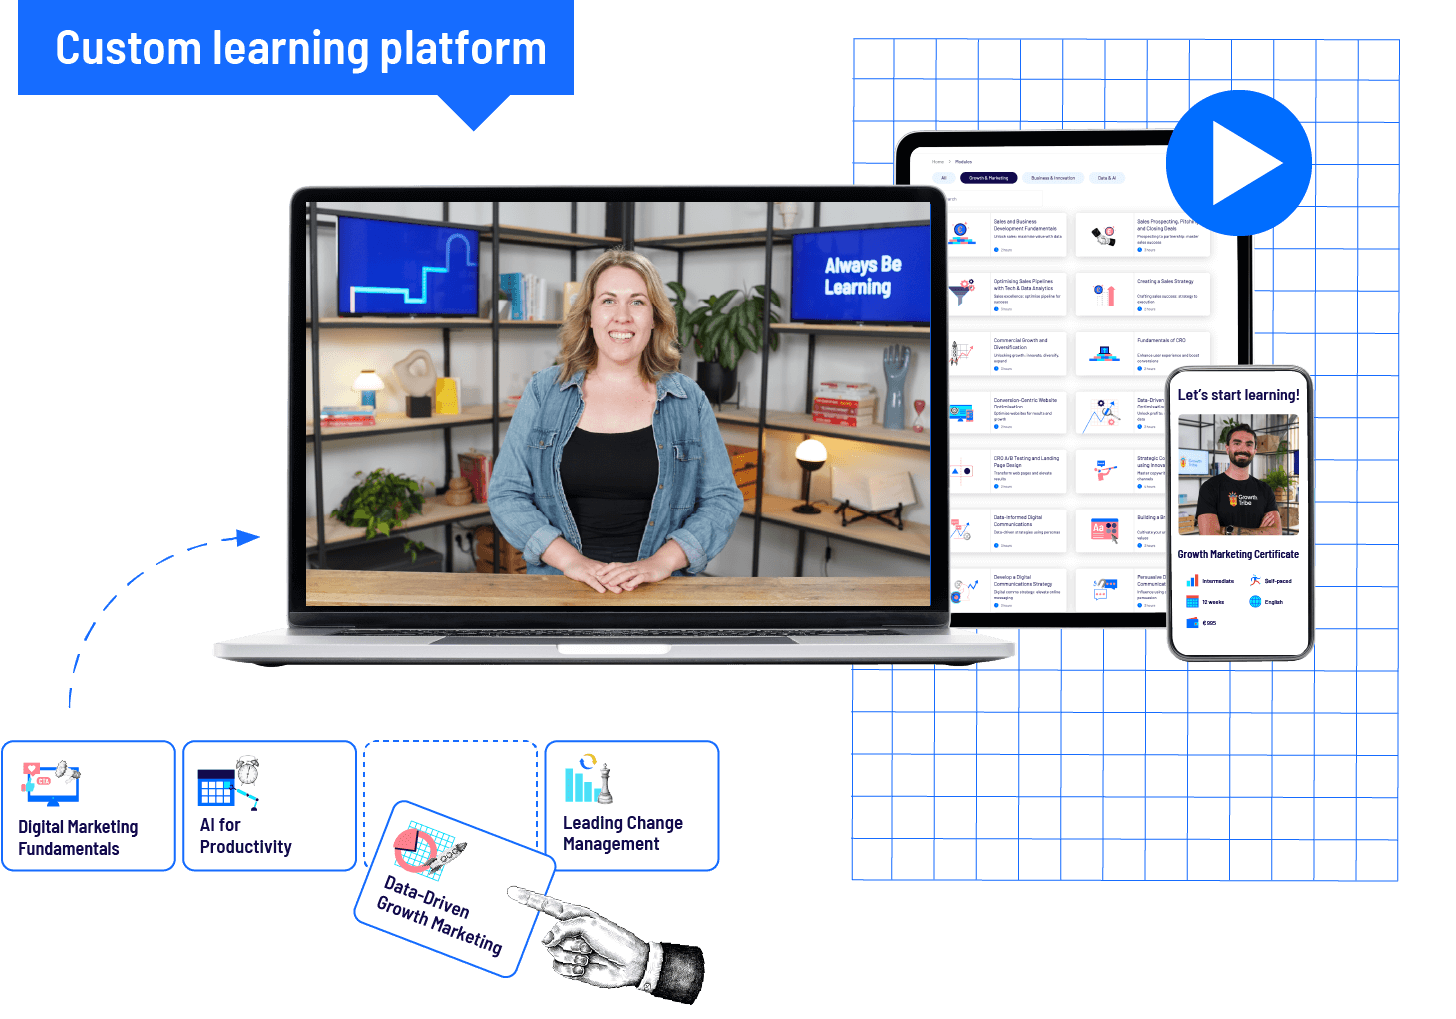 Growth Tribe Learning Platform, empower your team with actionable skills following on-demand courses